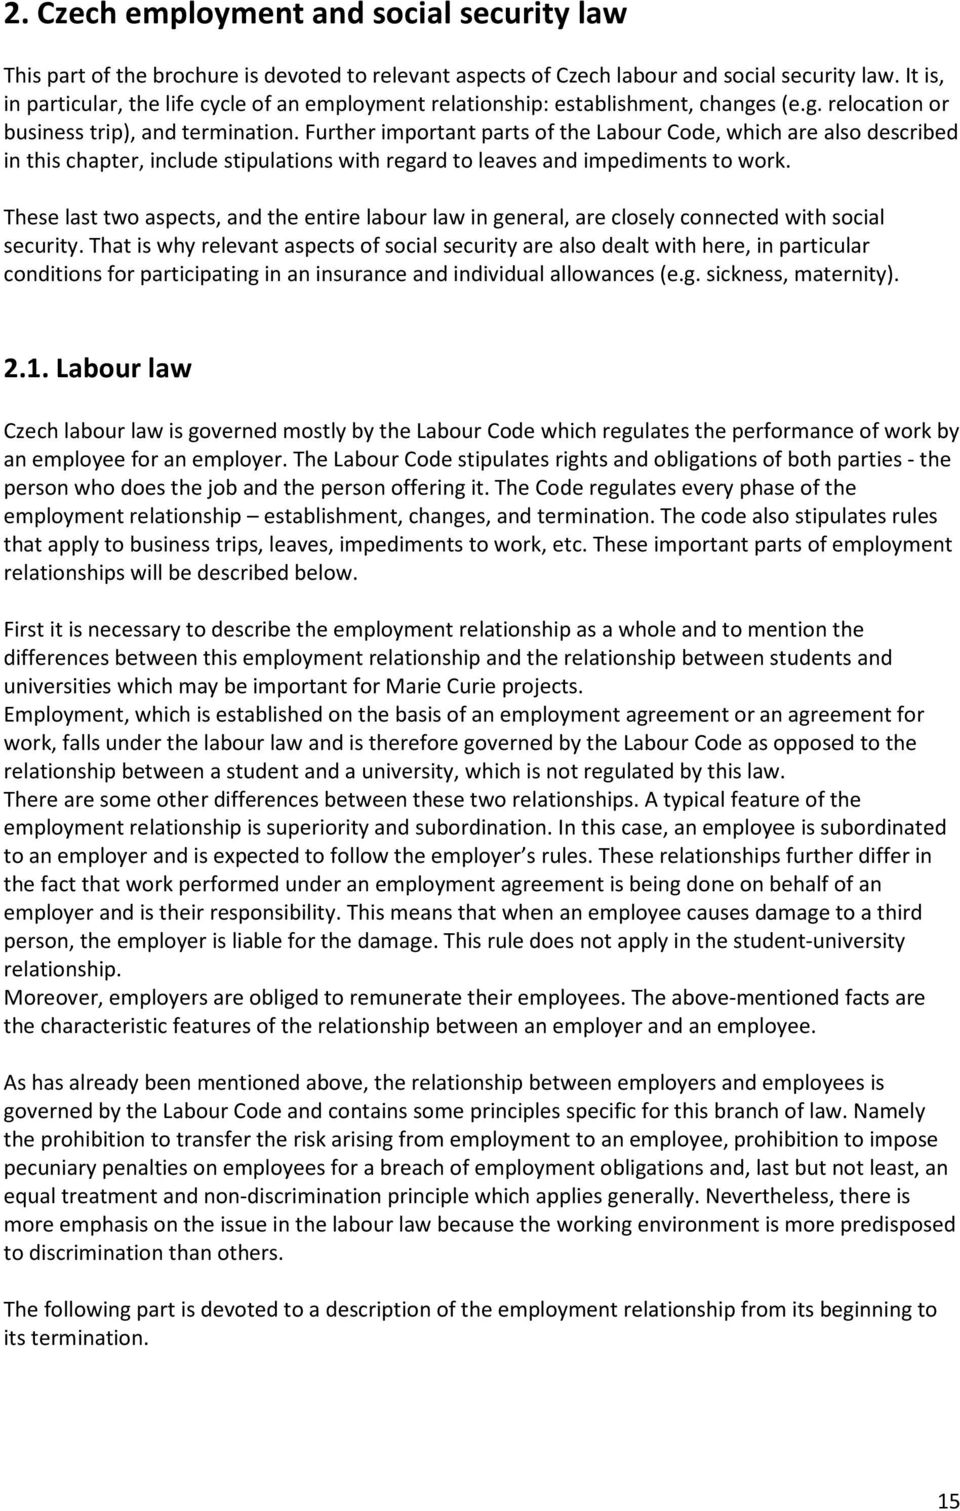 Further important parts of the Labour Code, which are also described in this chapter, include stipulations with regard to leaves and impediments to work.